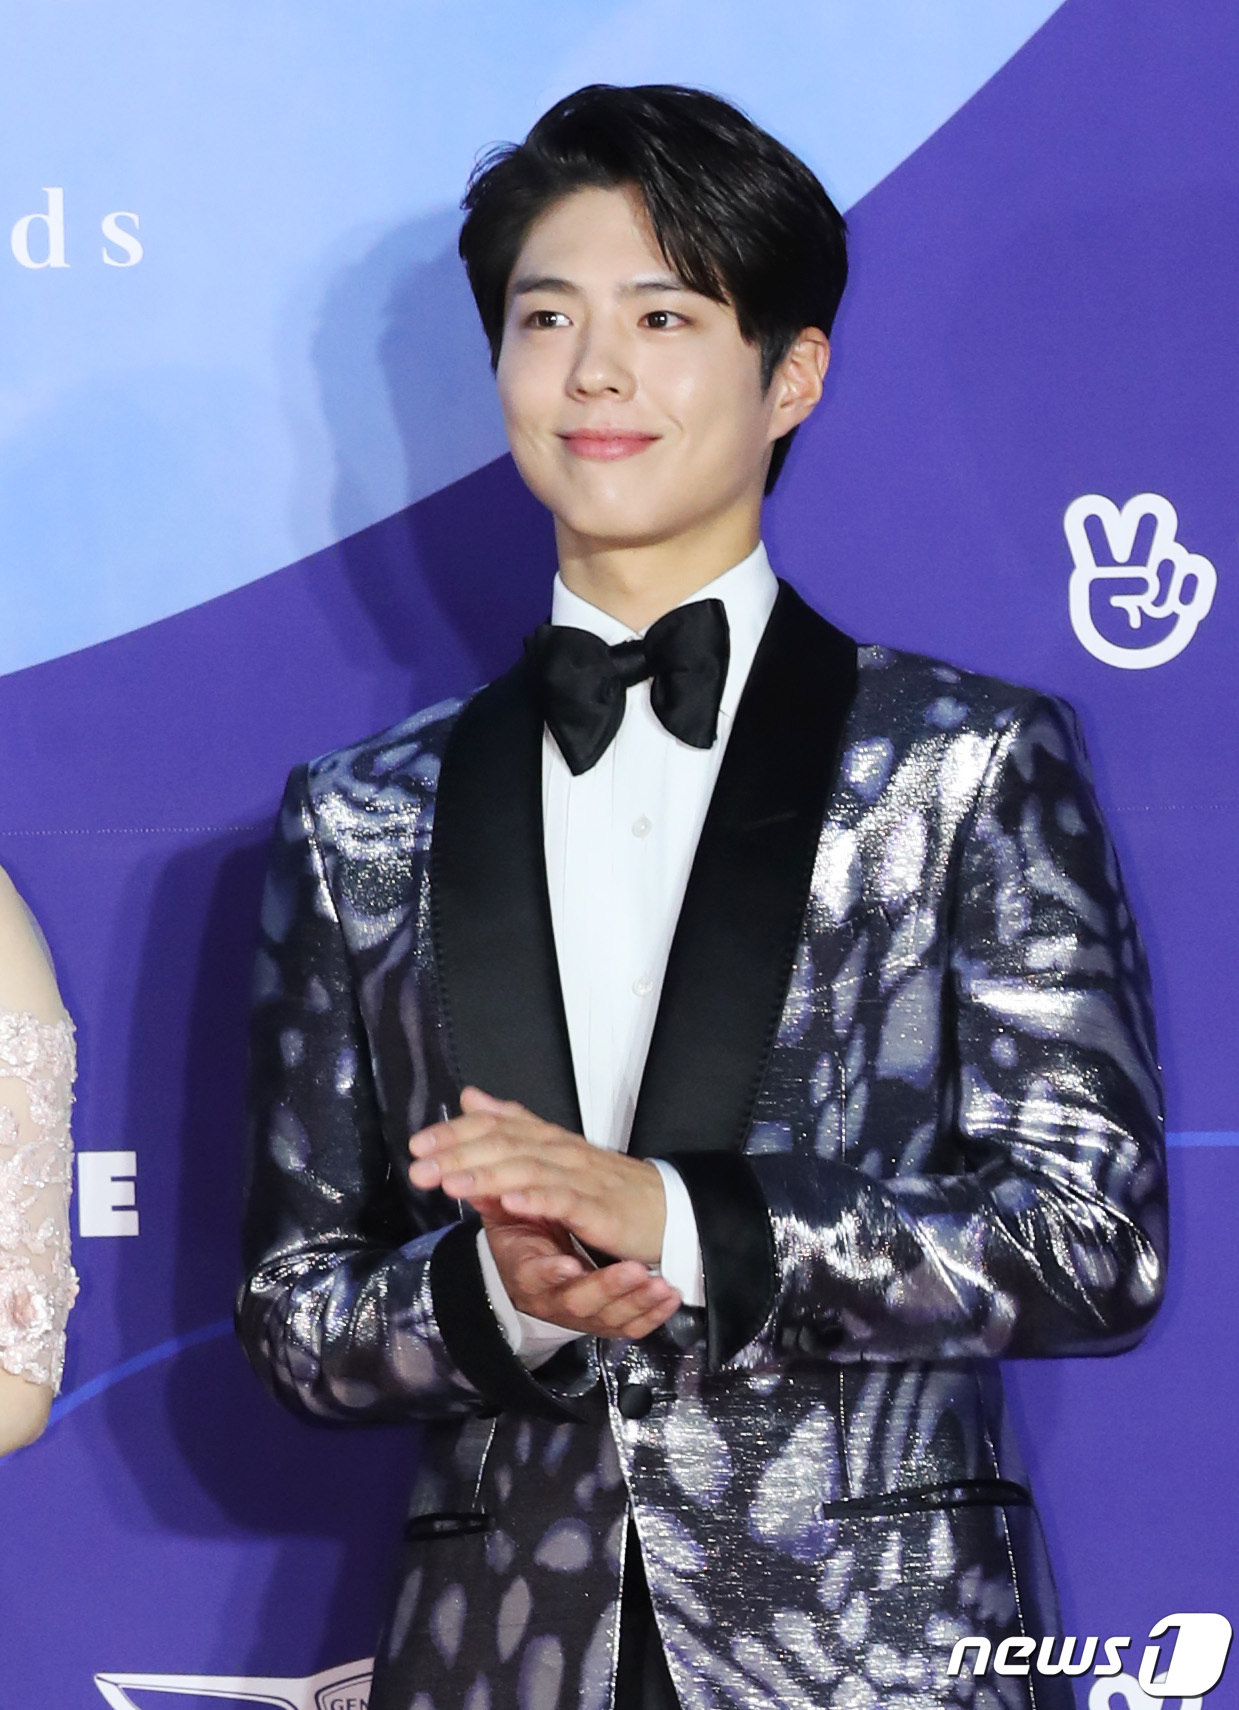 Seoul=) = Actor Park Bo-gum floats on Itaewon KlathPark Bo-gum will make a special appearance with director Kim Seong-yoon, JTBC gilt drama Itaewon Klath (played by Cho Kwang-jin/director Kim Seong-yoon) said on the 16th. The filming is finished, and the detailed roles are confirmed through broadcasting.Park Bo-gum made a relationship with Kim Seong-yoon PD through KBS drama Gurmigreen Moonlight in 2016.There is interest in what role will catch the attention of viewers in this Itaewon Clath.Itaewon Clath is a drama starring Park Seo-joon and Kim Dae-mi, and has gained popularity with ratings exceeding 14% (based on Nielsen Korea comprehensive programming channel).Park Bo-gum is scheduled to appear in TVNs new drama Youth Record scheduled to air this year.